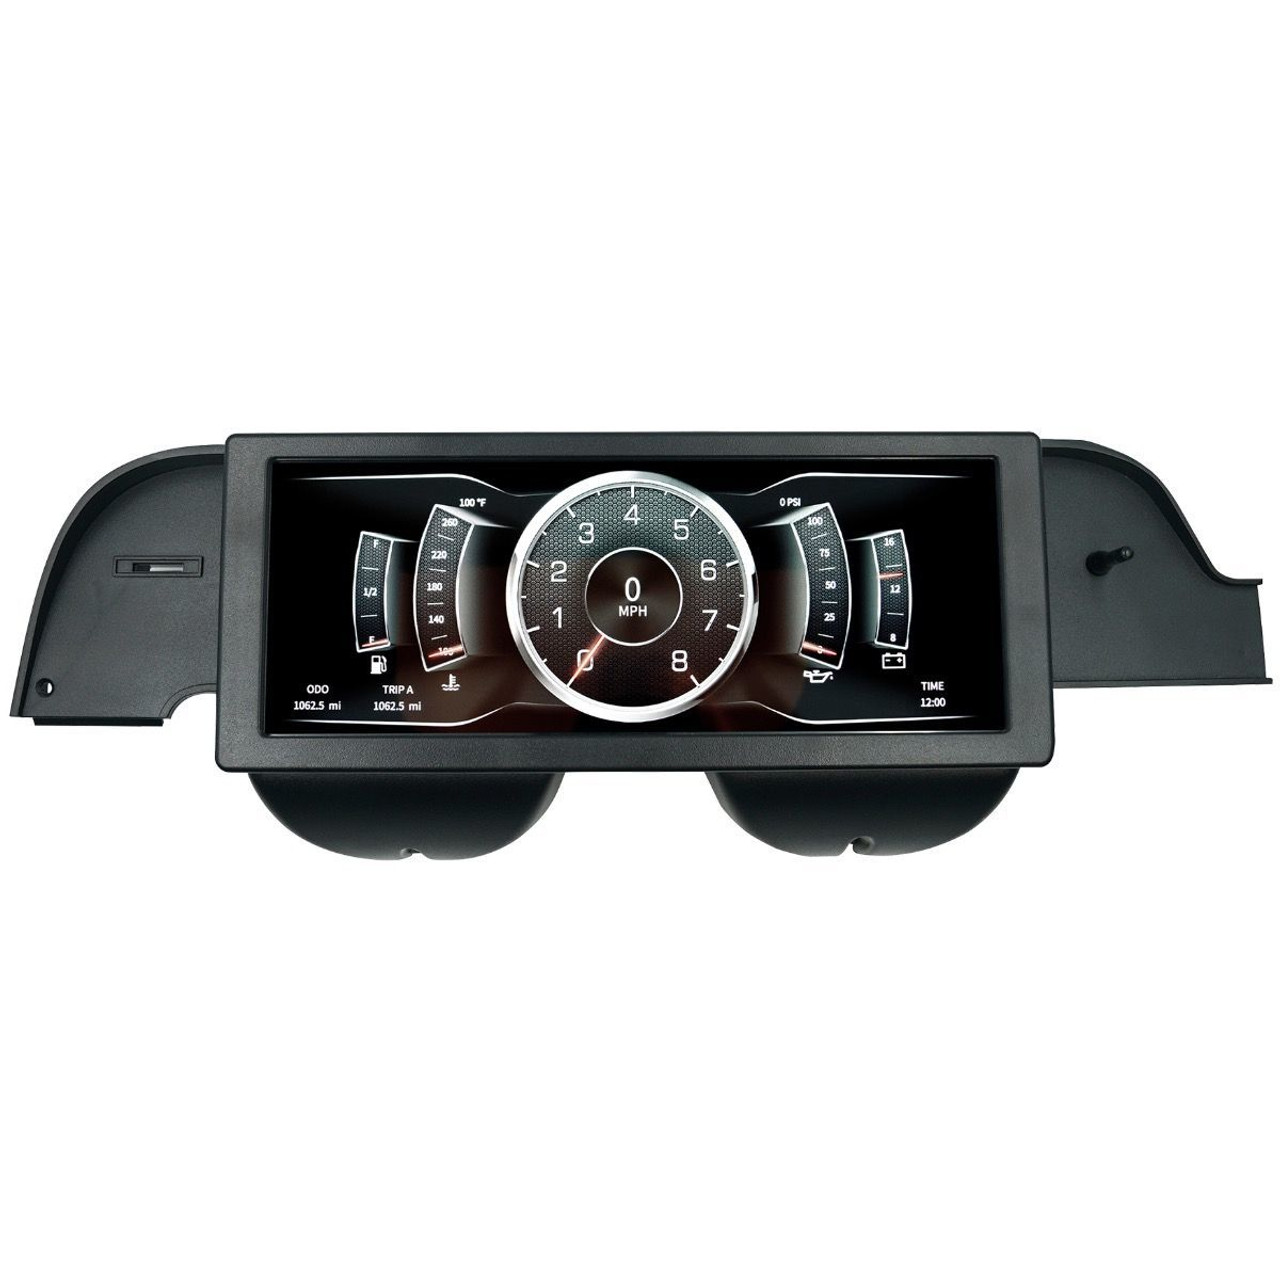 Invision LCD Dash Kit - 67-68 Mustang Direct Fit